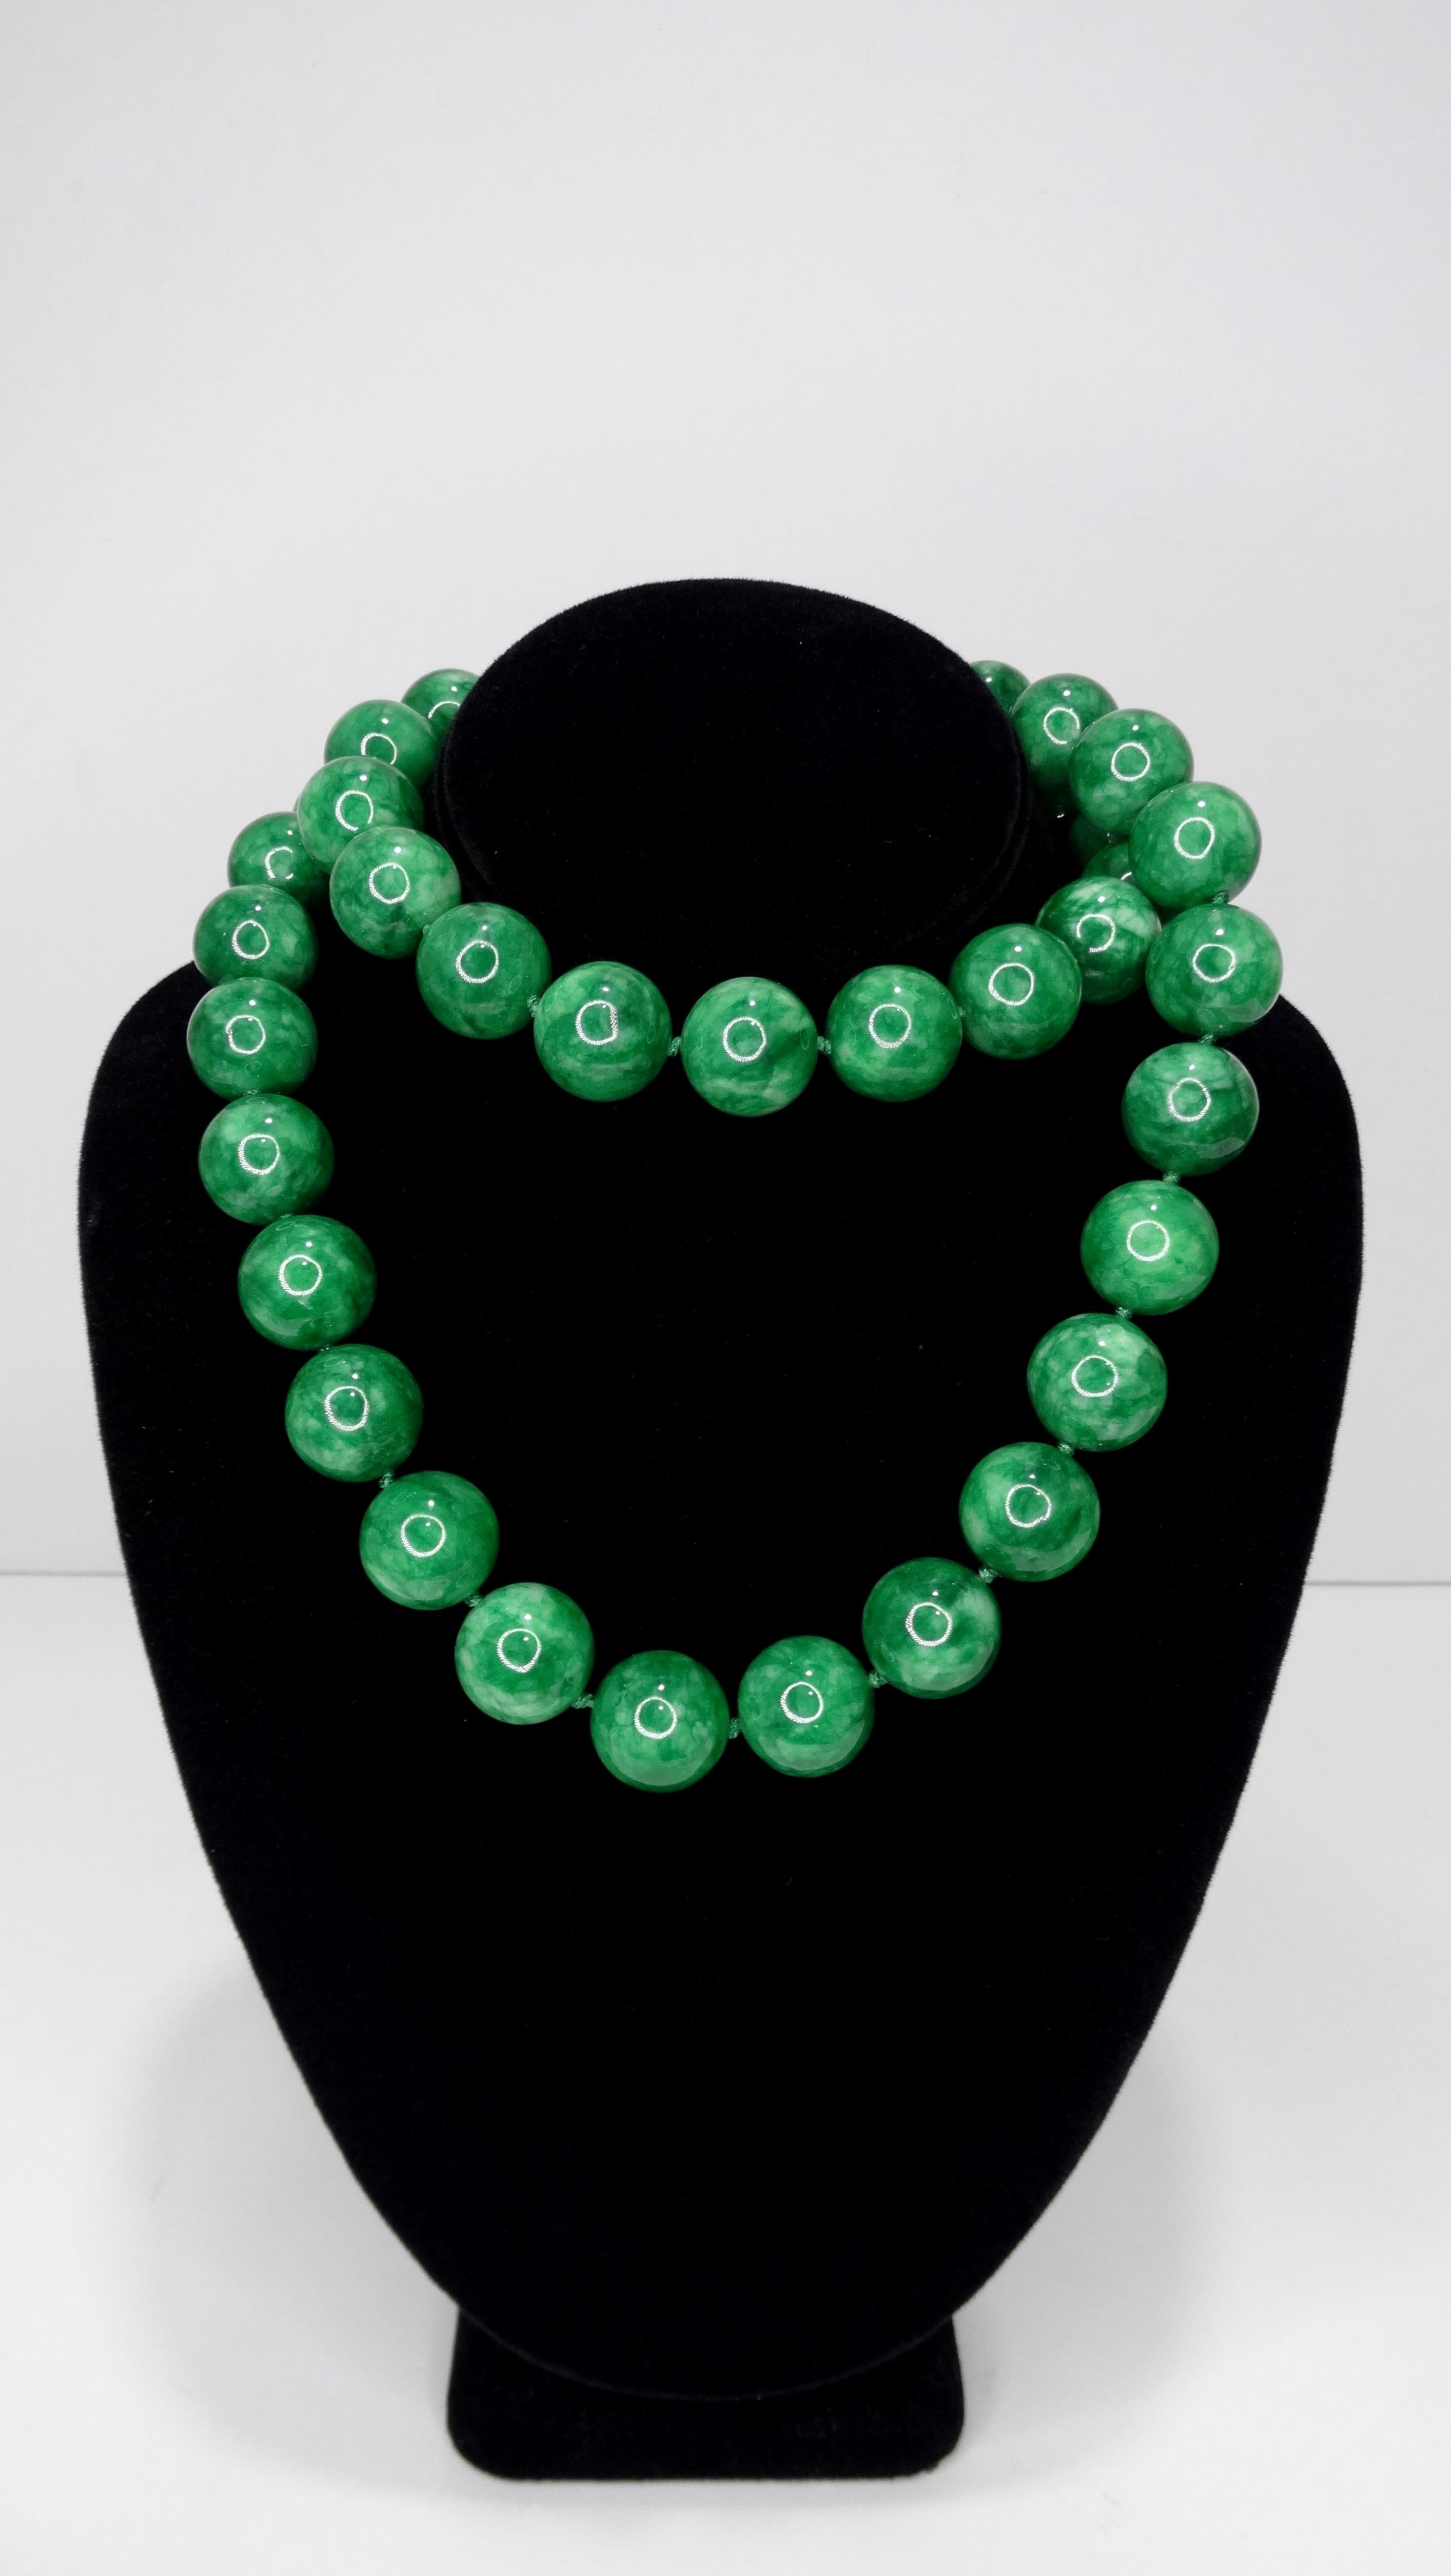 Jade bead necklace purchased in mid/late 20th century. Weighs 370.55g in total weight and has 45 beads, beads are Large in scale and knotted in between each bead 16 inches long. Perfect for layering with your favorite Gold Chains or Chanel